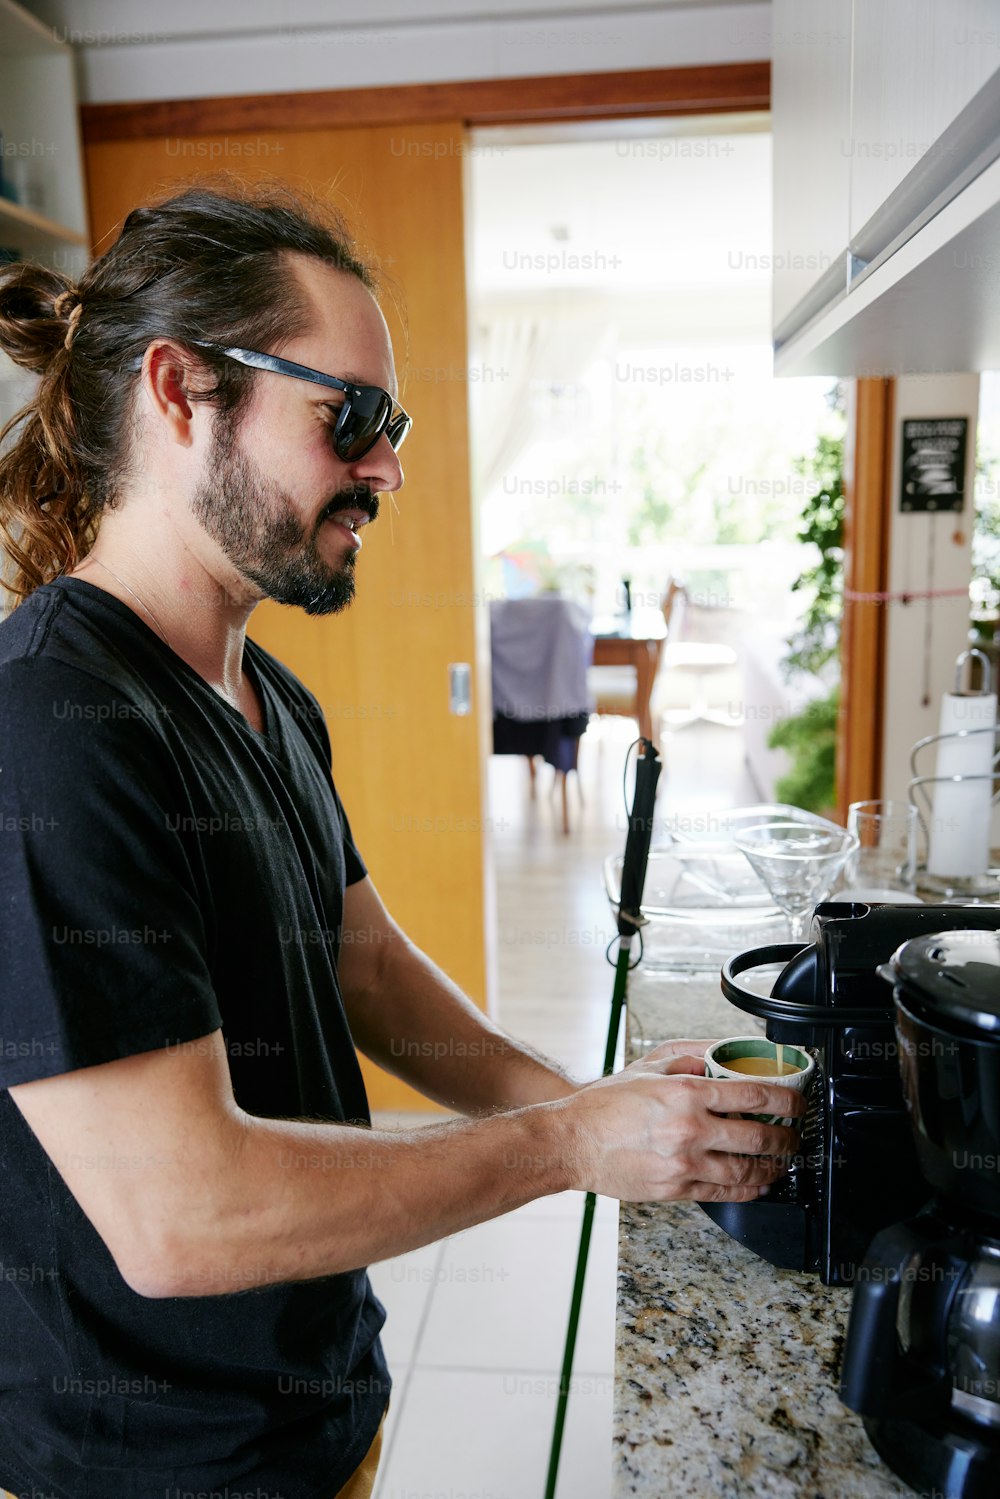 a man with a ponytail standing in a kitchen